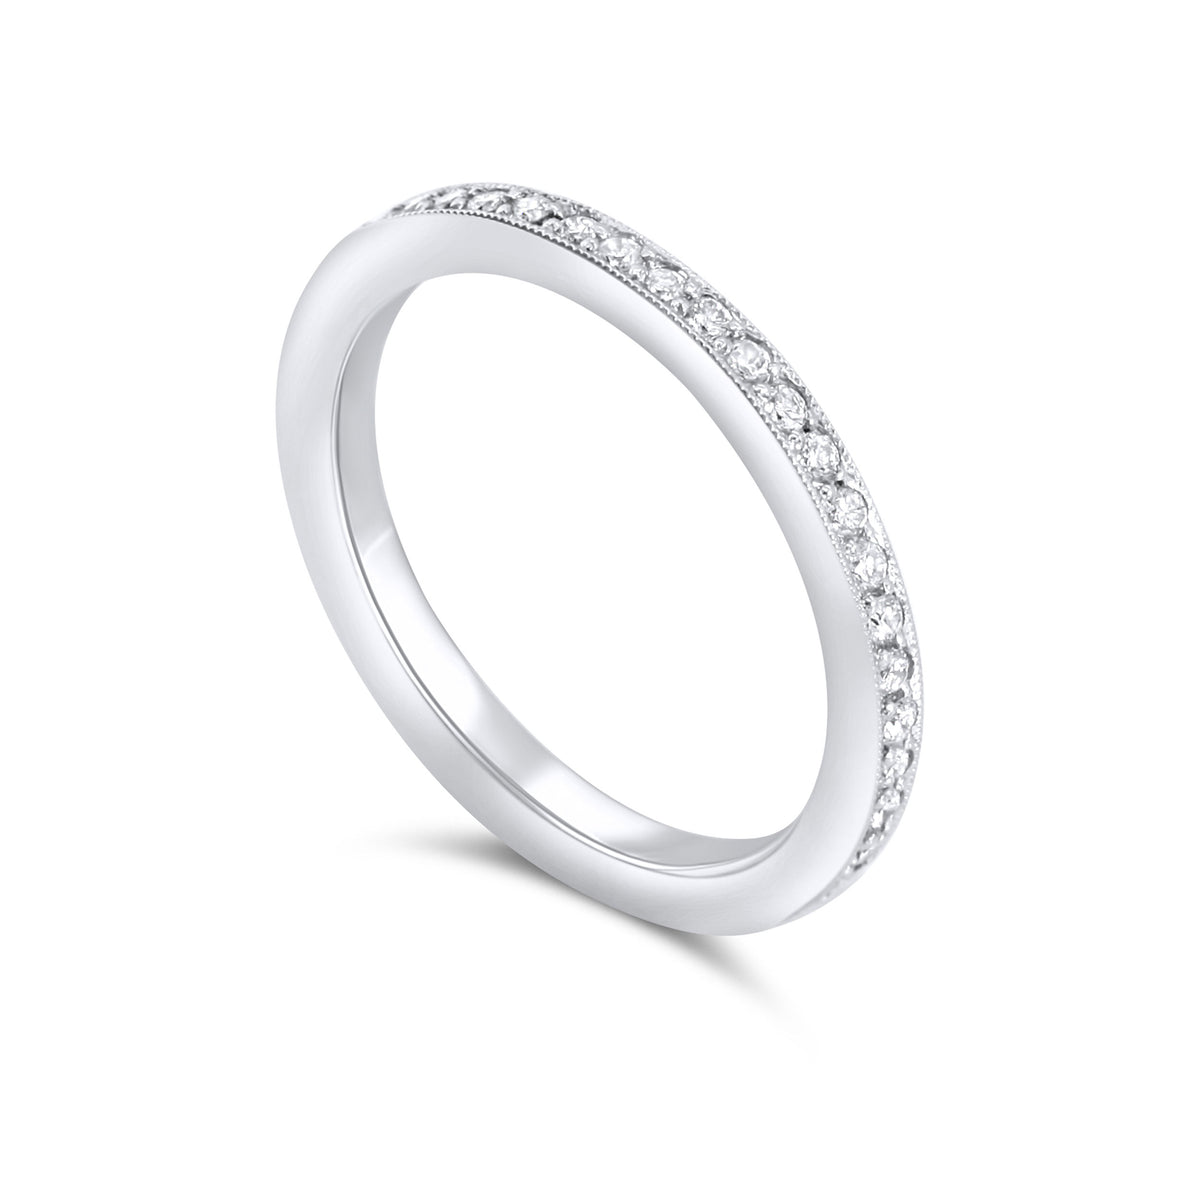 Hybrid Prong/Channel Eternity Band